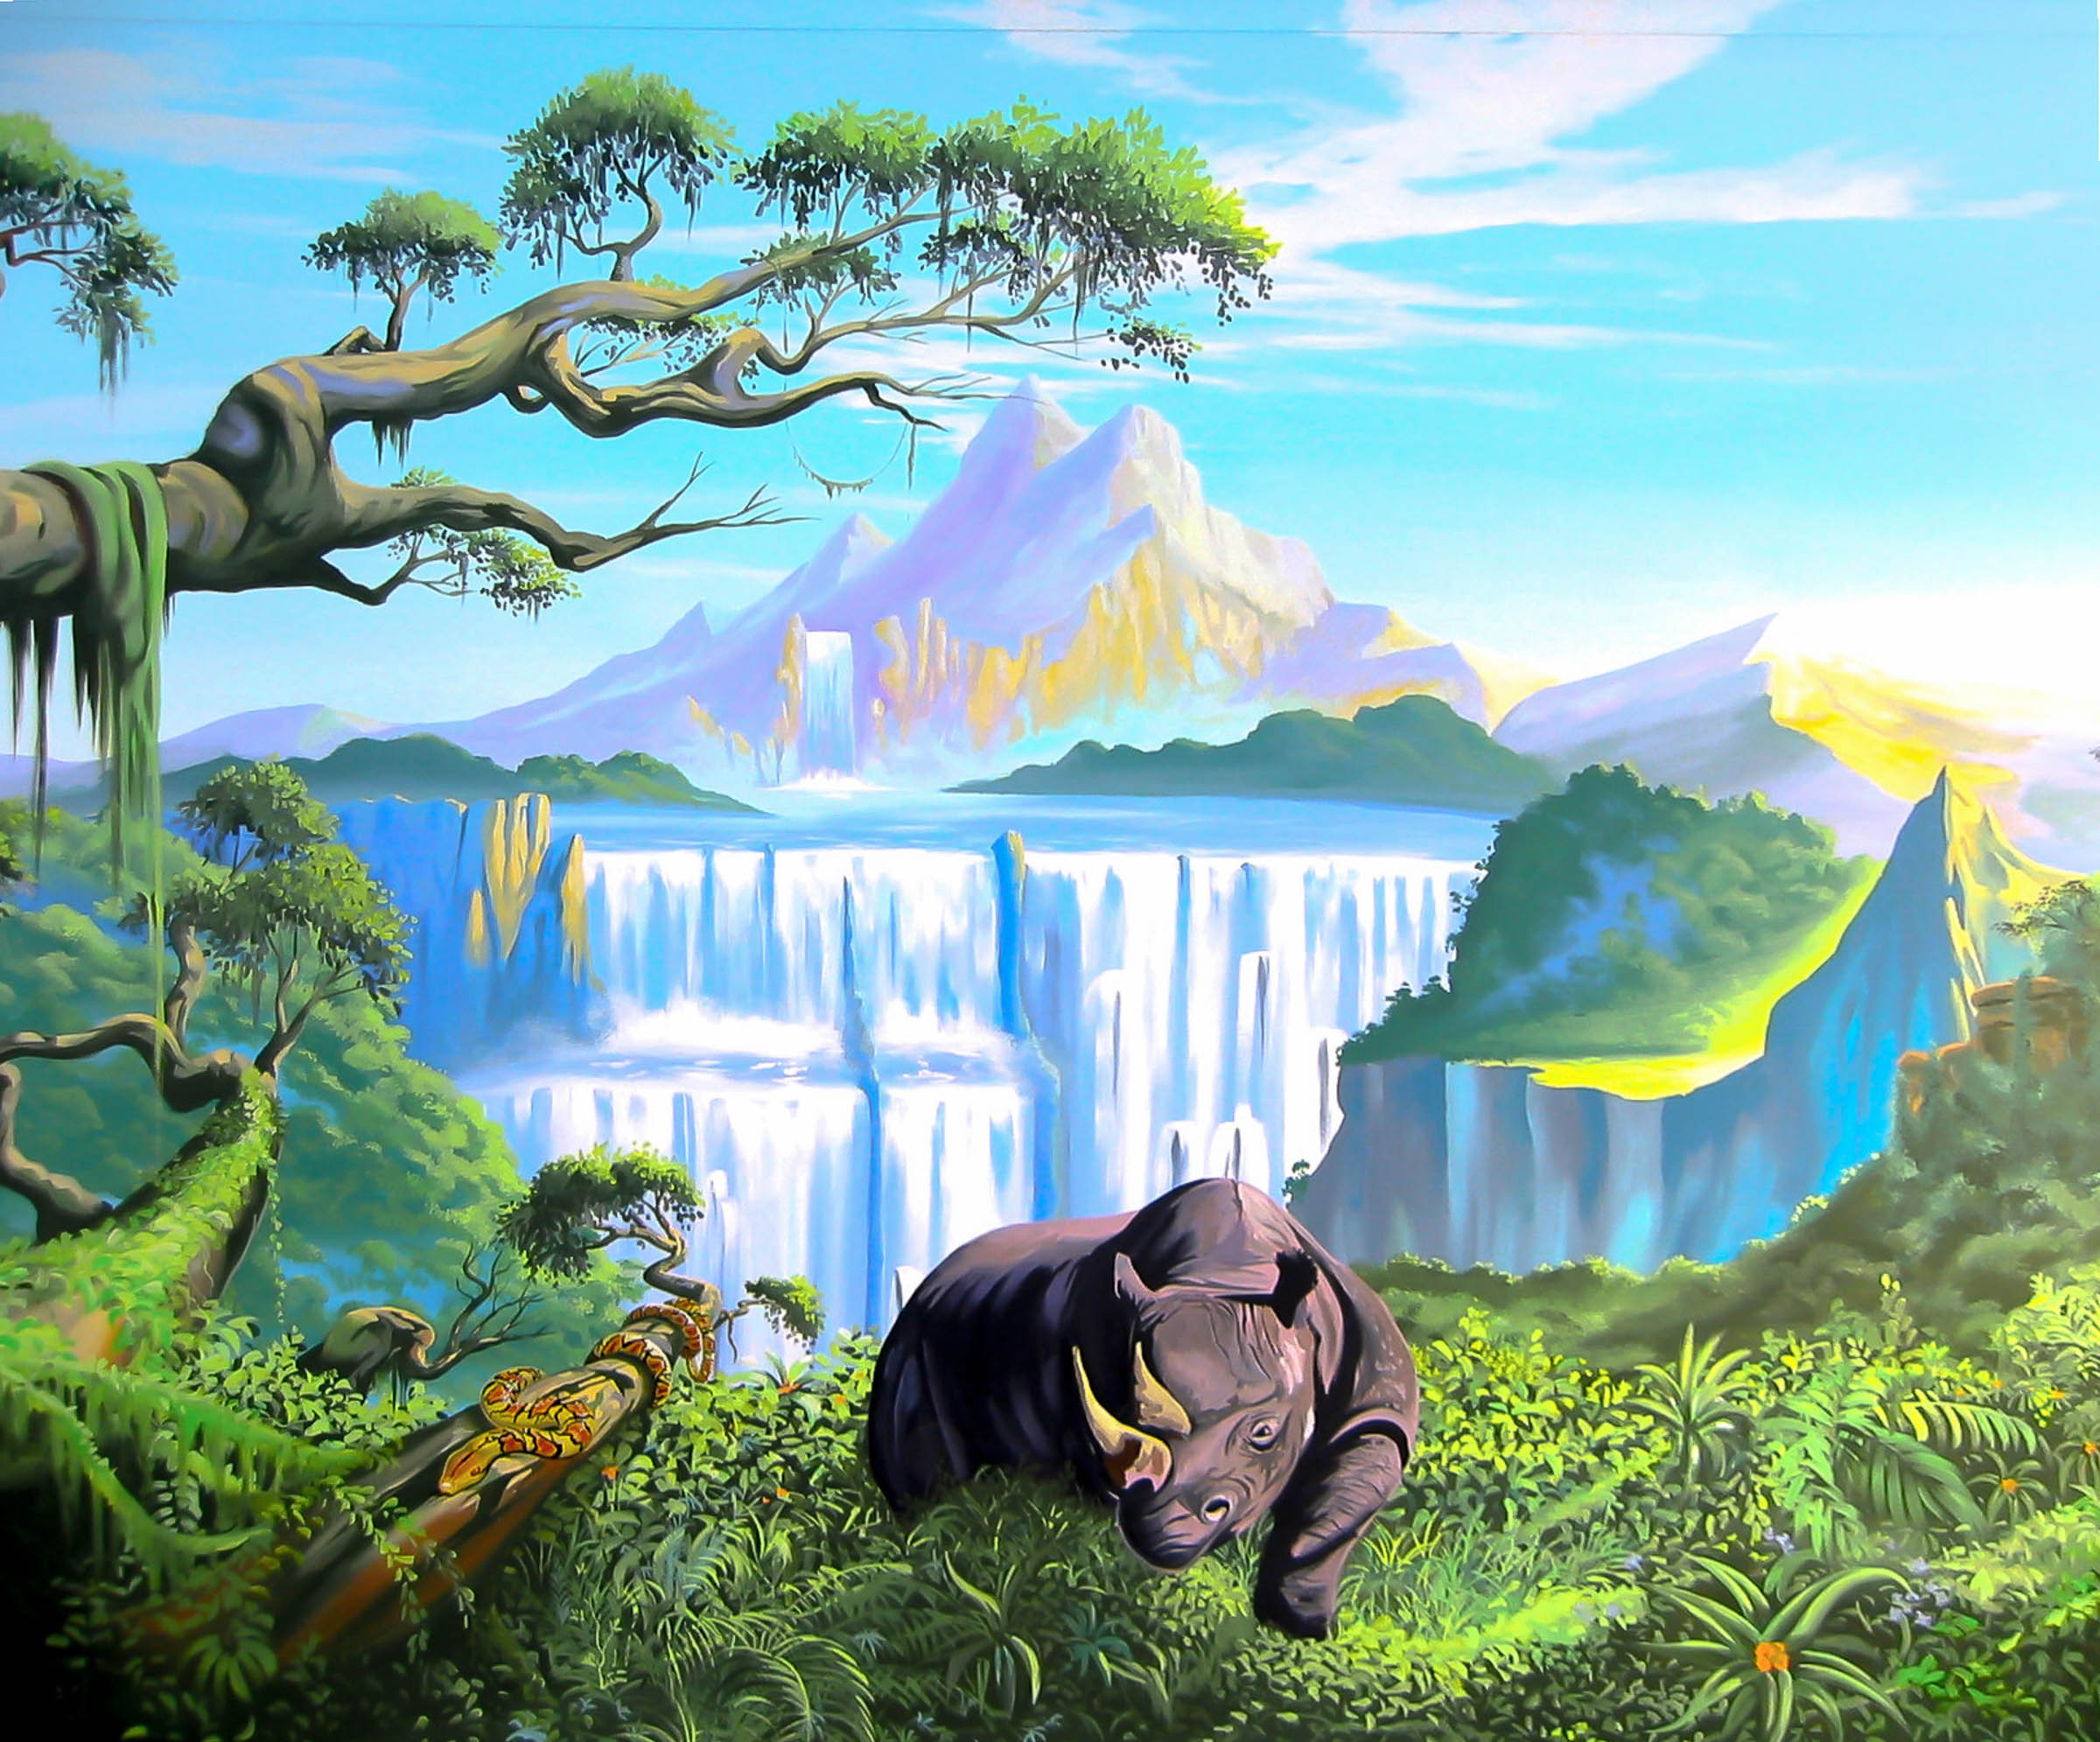 Jungle Wall Mural - This first image shows the main feature wall, with mountains and waterfall in the distance, snake and rhino in the foreground